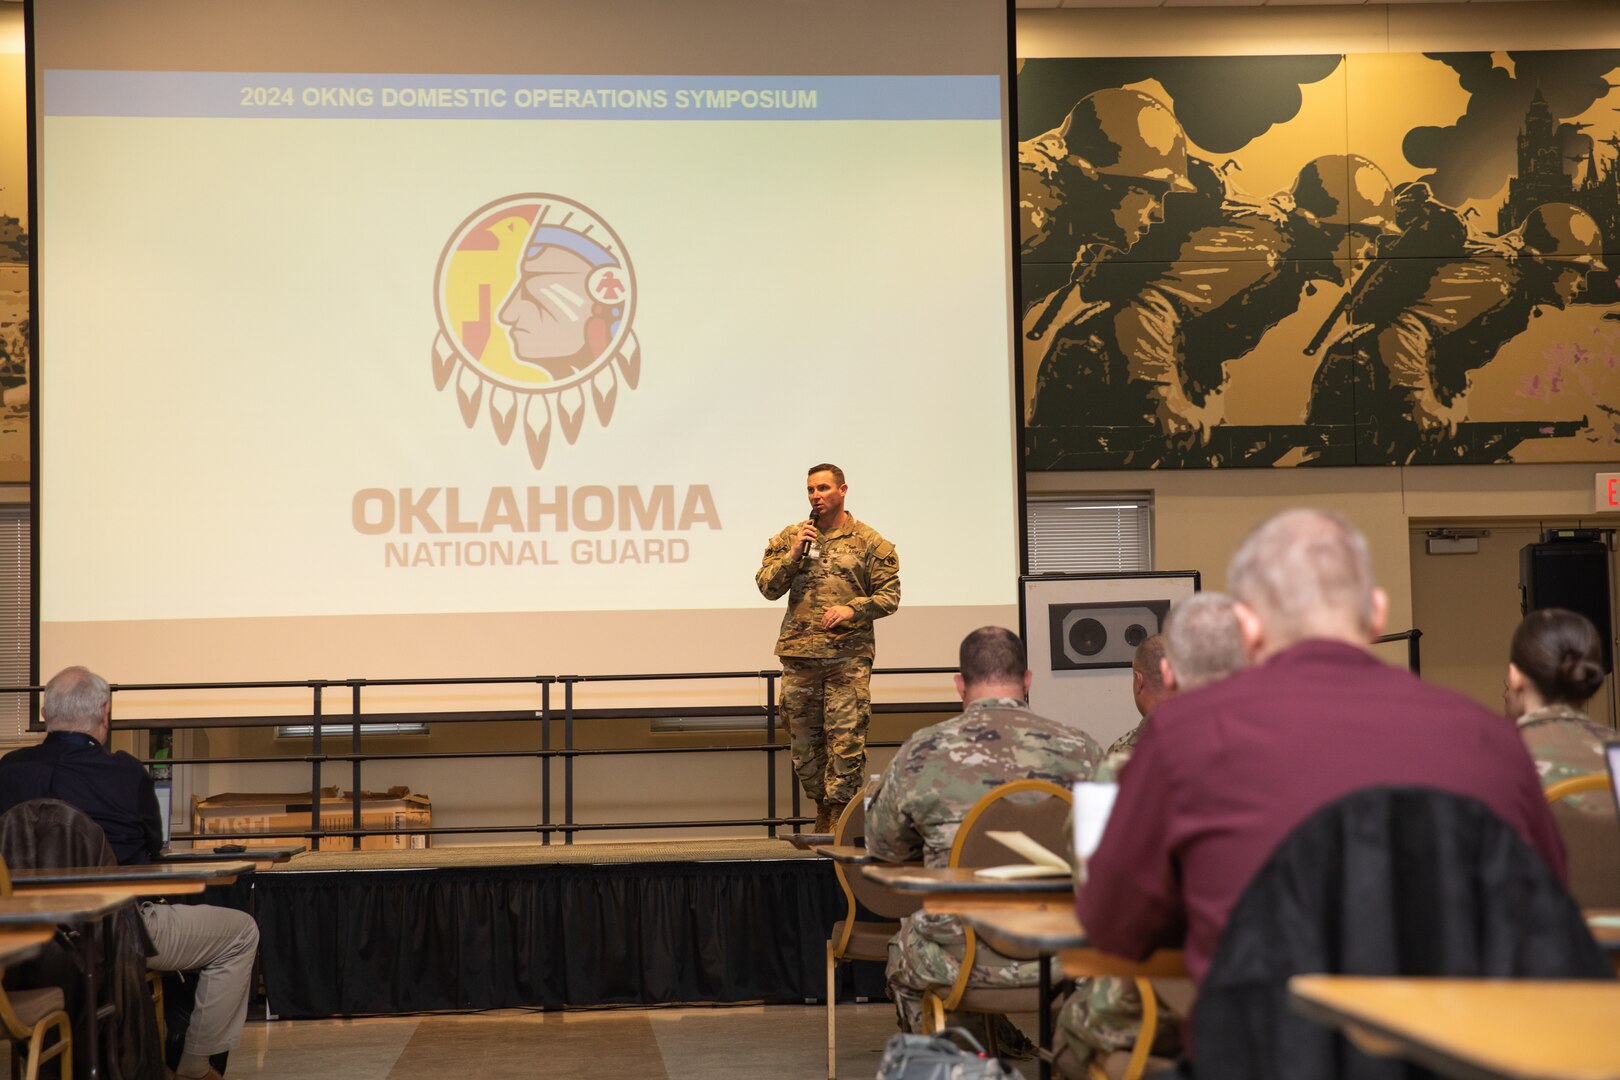 Lt. Col. Brent Hill, deputy director of military support for the Oklahoma National Guard, speaks at the inaugural Domestic Operations Symposium at the Armed Forces Reserve Center in Norman, Oklahoma, Jan. 23, 2024. More than 20 emergency response agencies from across the state gathered for the event to build a shared understanding of roles and responsibilities, encourage collaborative planning, mutual aid, and participation in upcoming training events. (Oklahoma National Guard photo by Staff Sgt. Reece Heck)